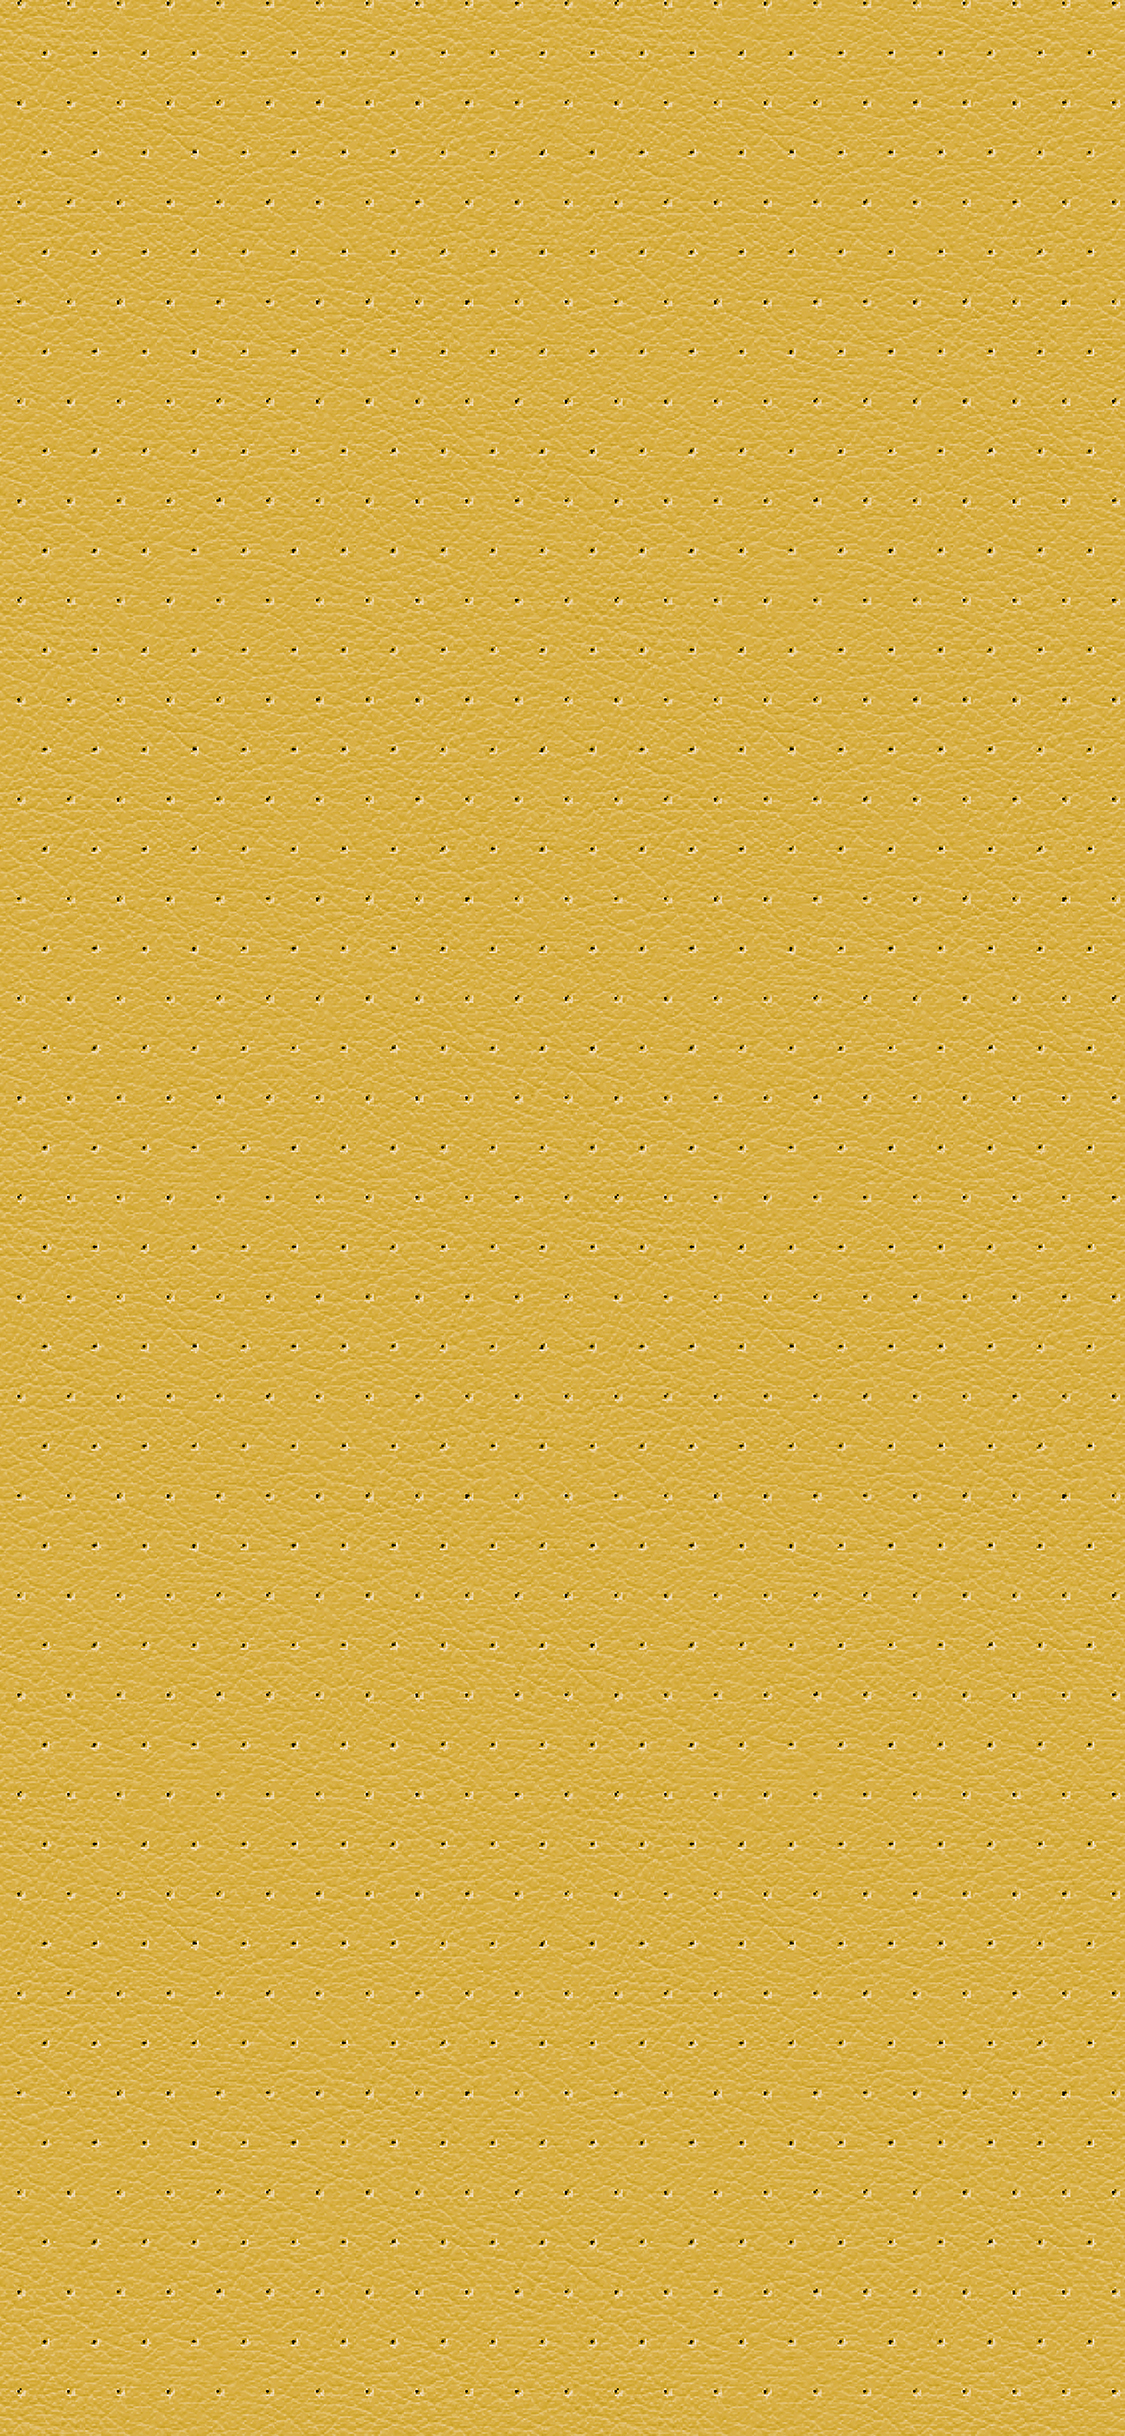 iPhoneXpapers perforated gold pattern